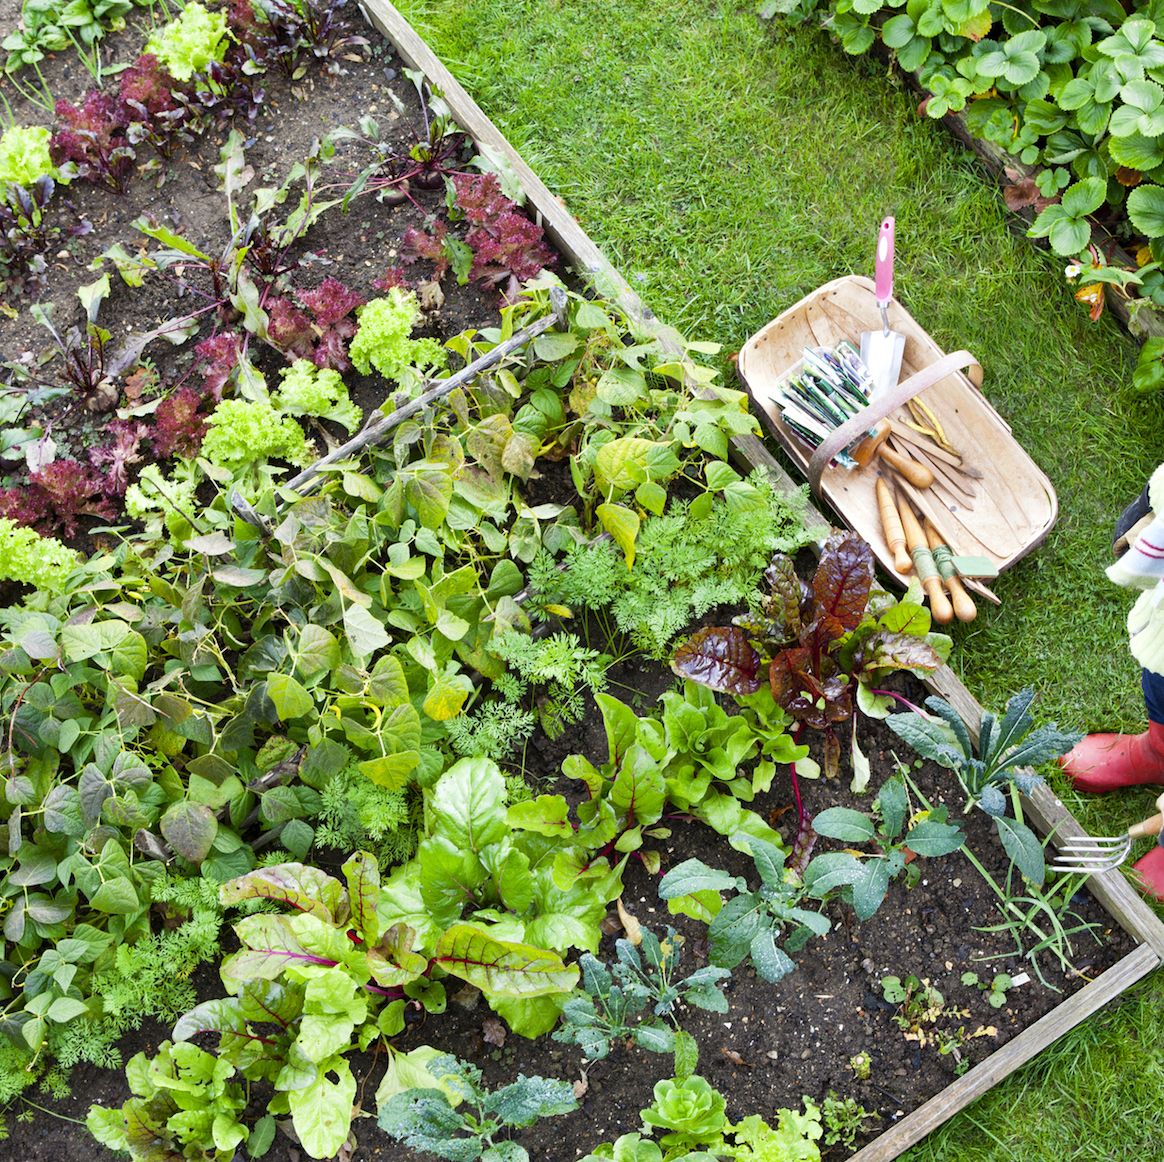 How a No-Dig Garden Leads to Healthier Soil and Thriving Plants